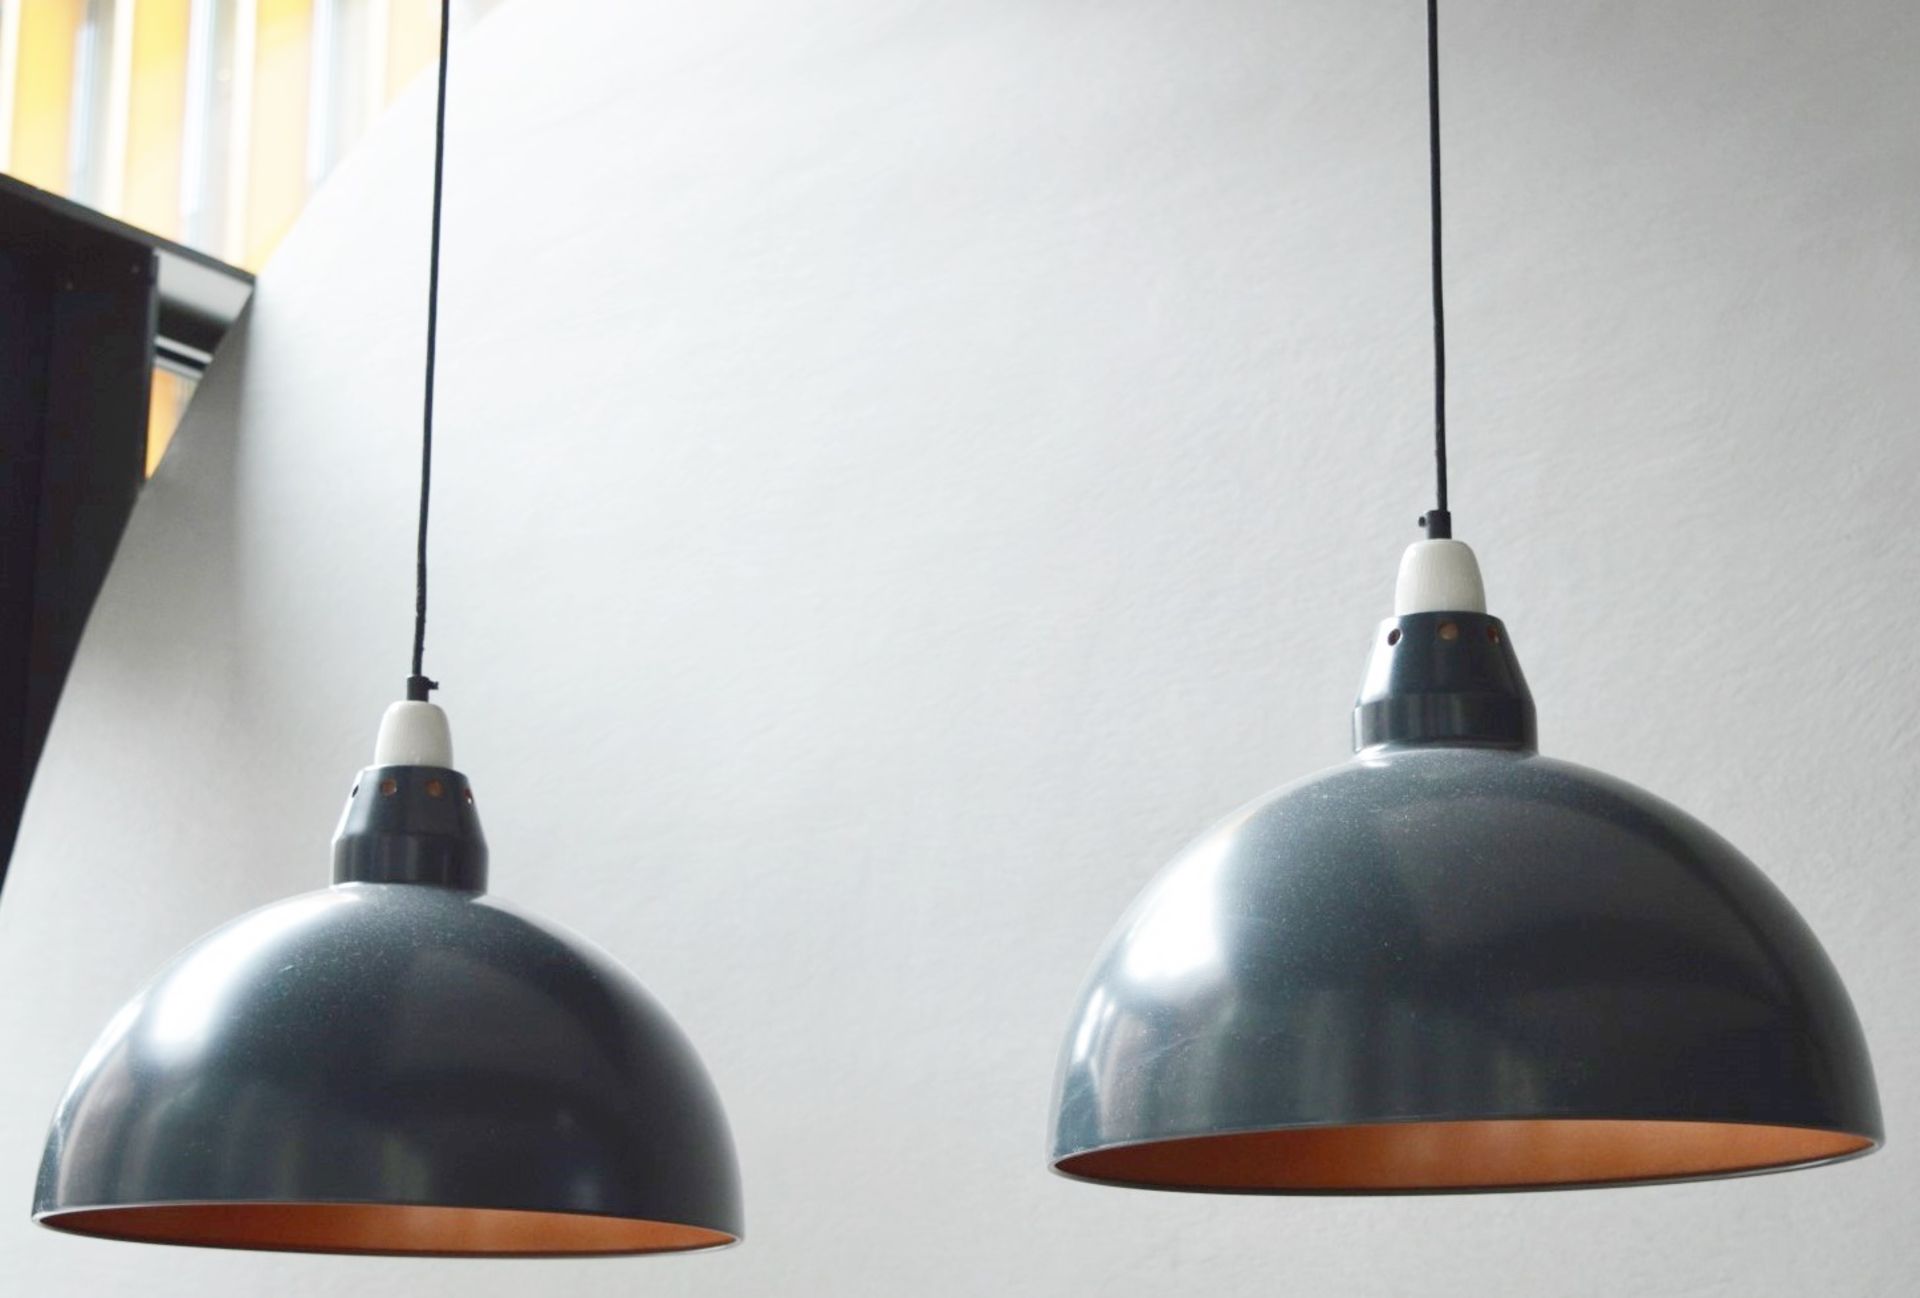 4 x Dome Pendant Ceiling Light Fittings - Grey and Copper - Vintage Style - 40cm Diameter - 250cm - Image 6 of 6